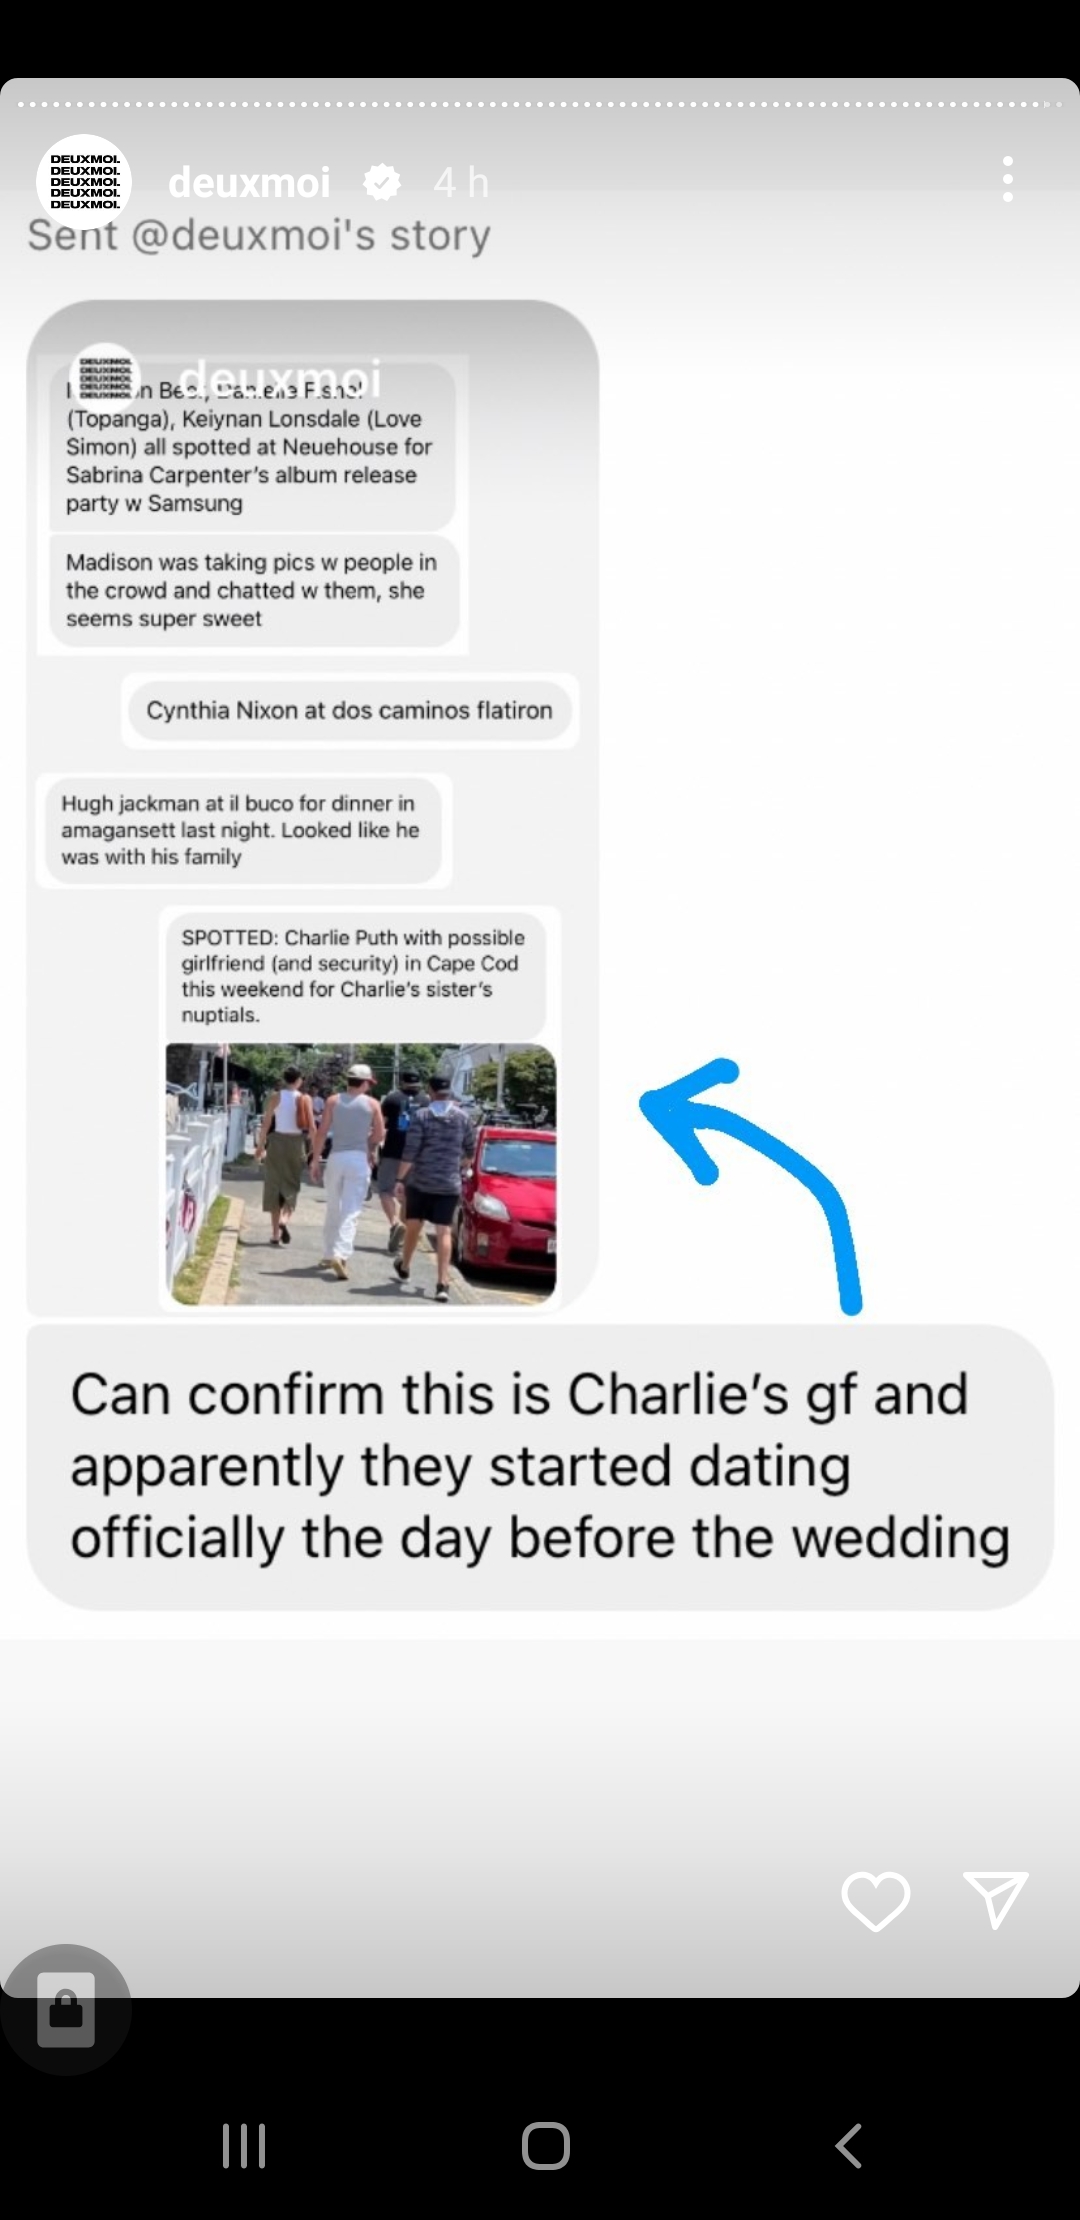 Deuxmoi reported that Charlie Puth's girlfriend was present at his sister's wedding.